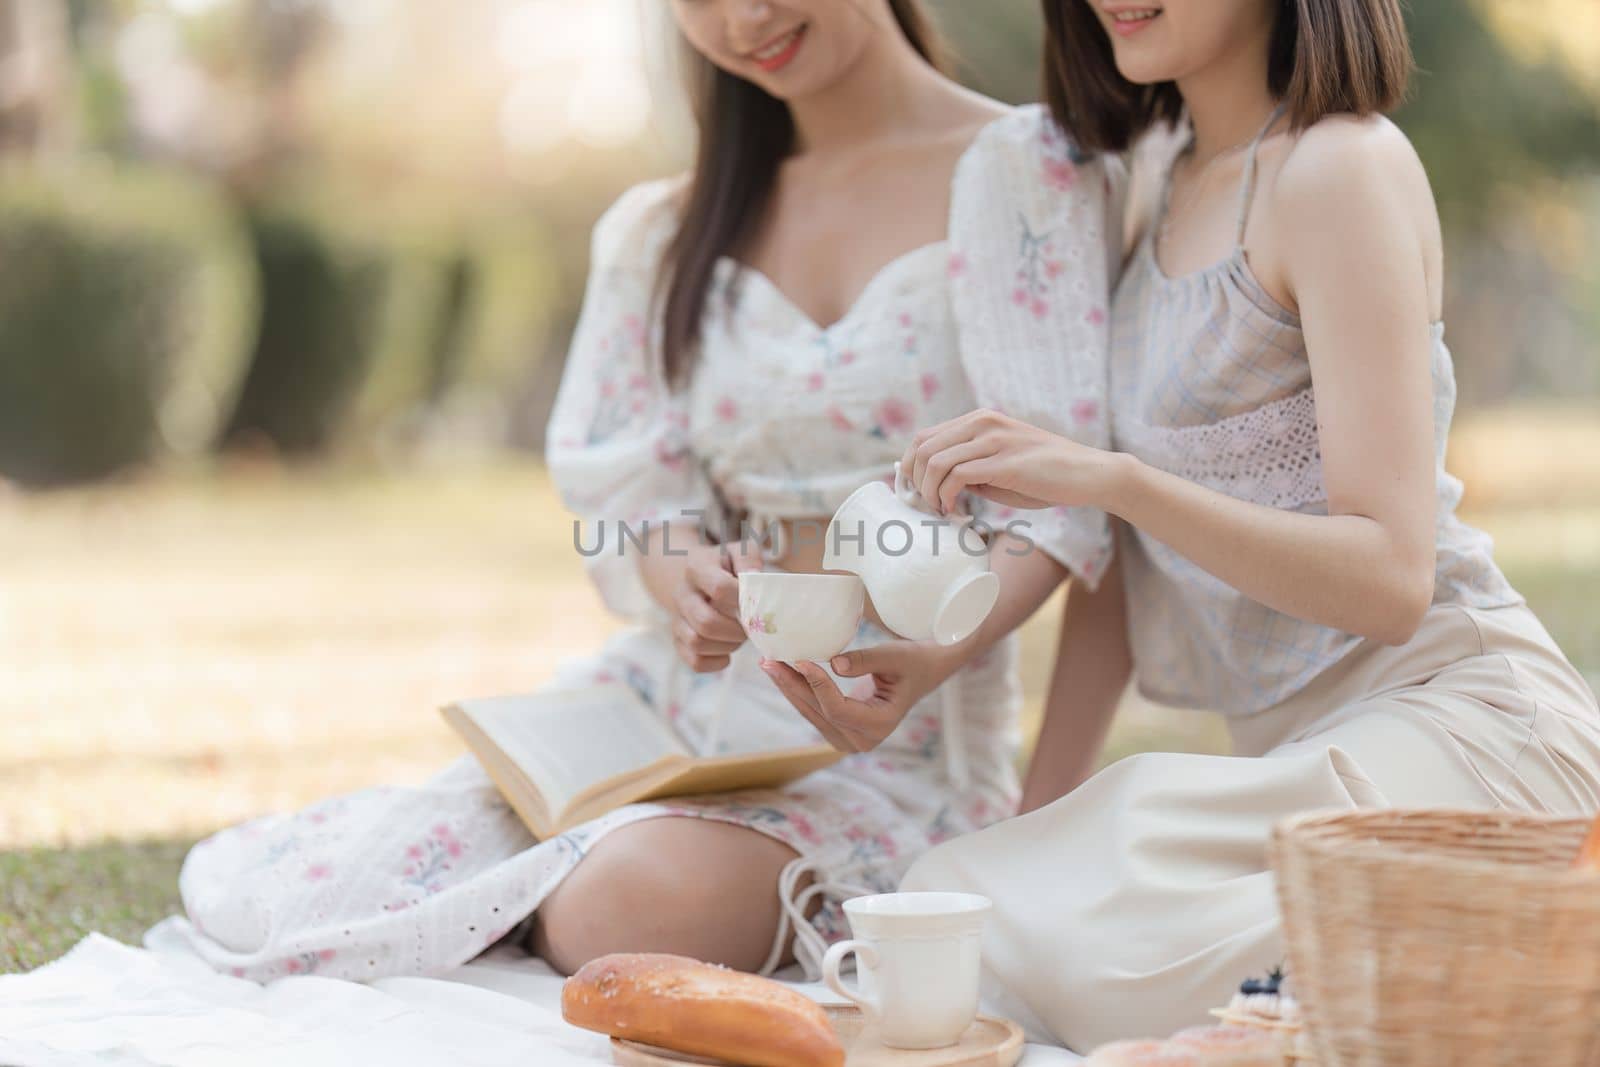 Beautiful woman and friend having picnic on sunny spring day in outdoor park. Valentine and LGBT concept by itchaznong